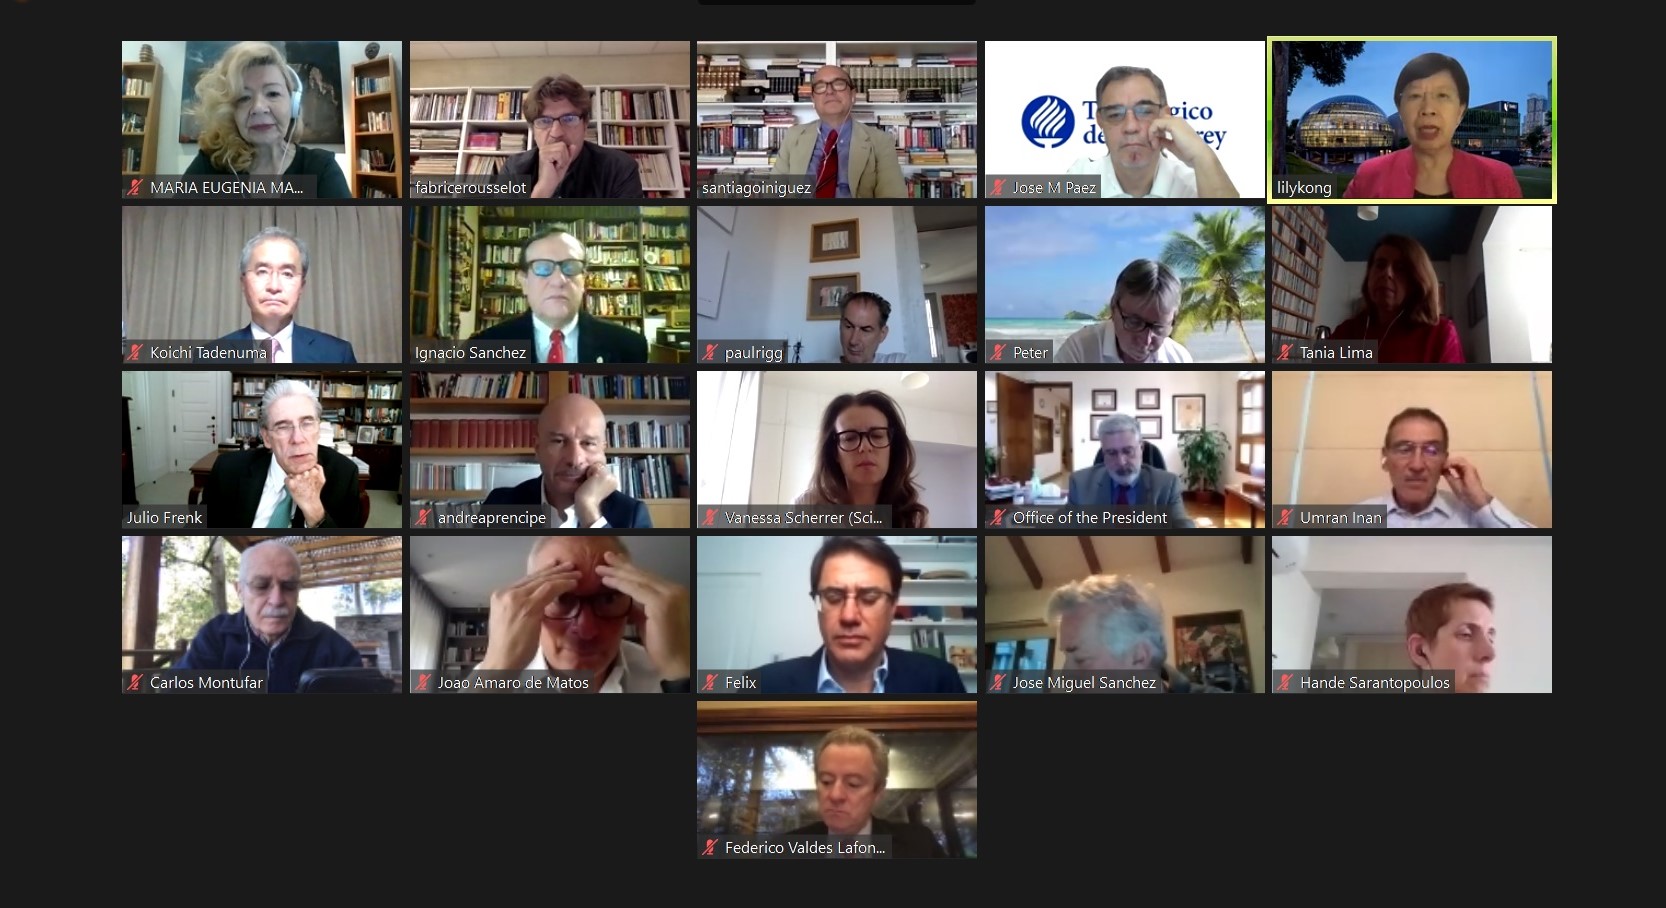 Screenshot of various University Leaders and participants of the Reinventing Higher Education event held on 29 June 2020